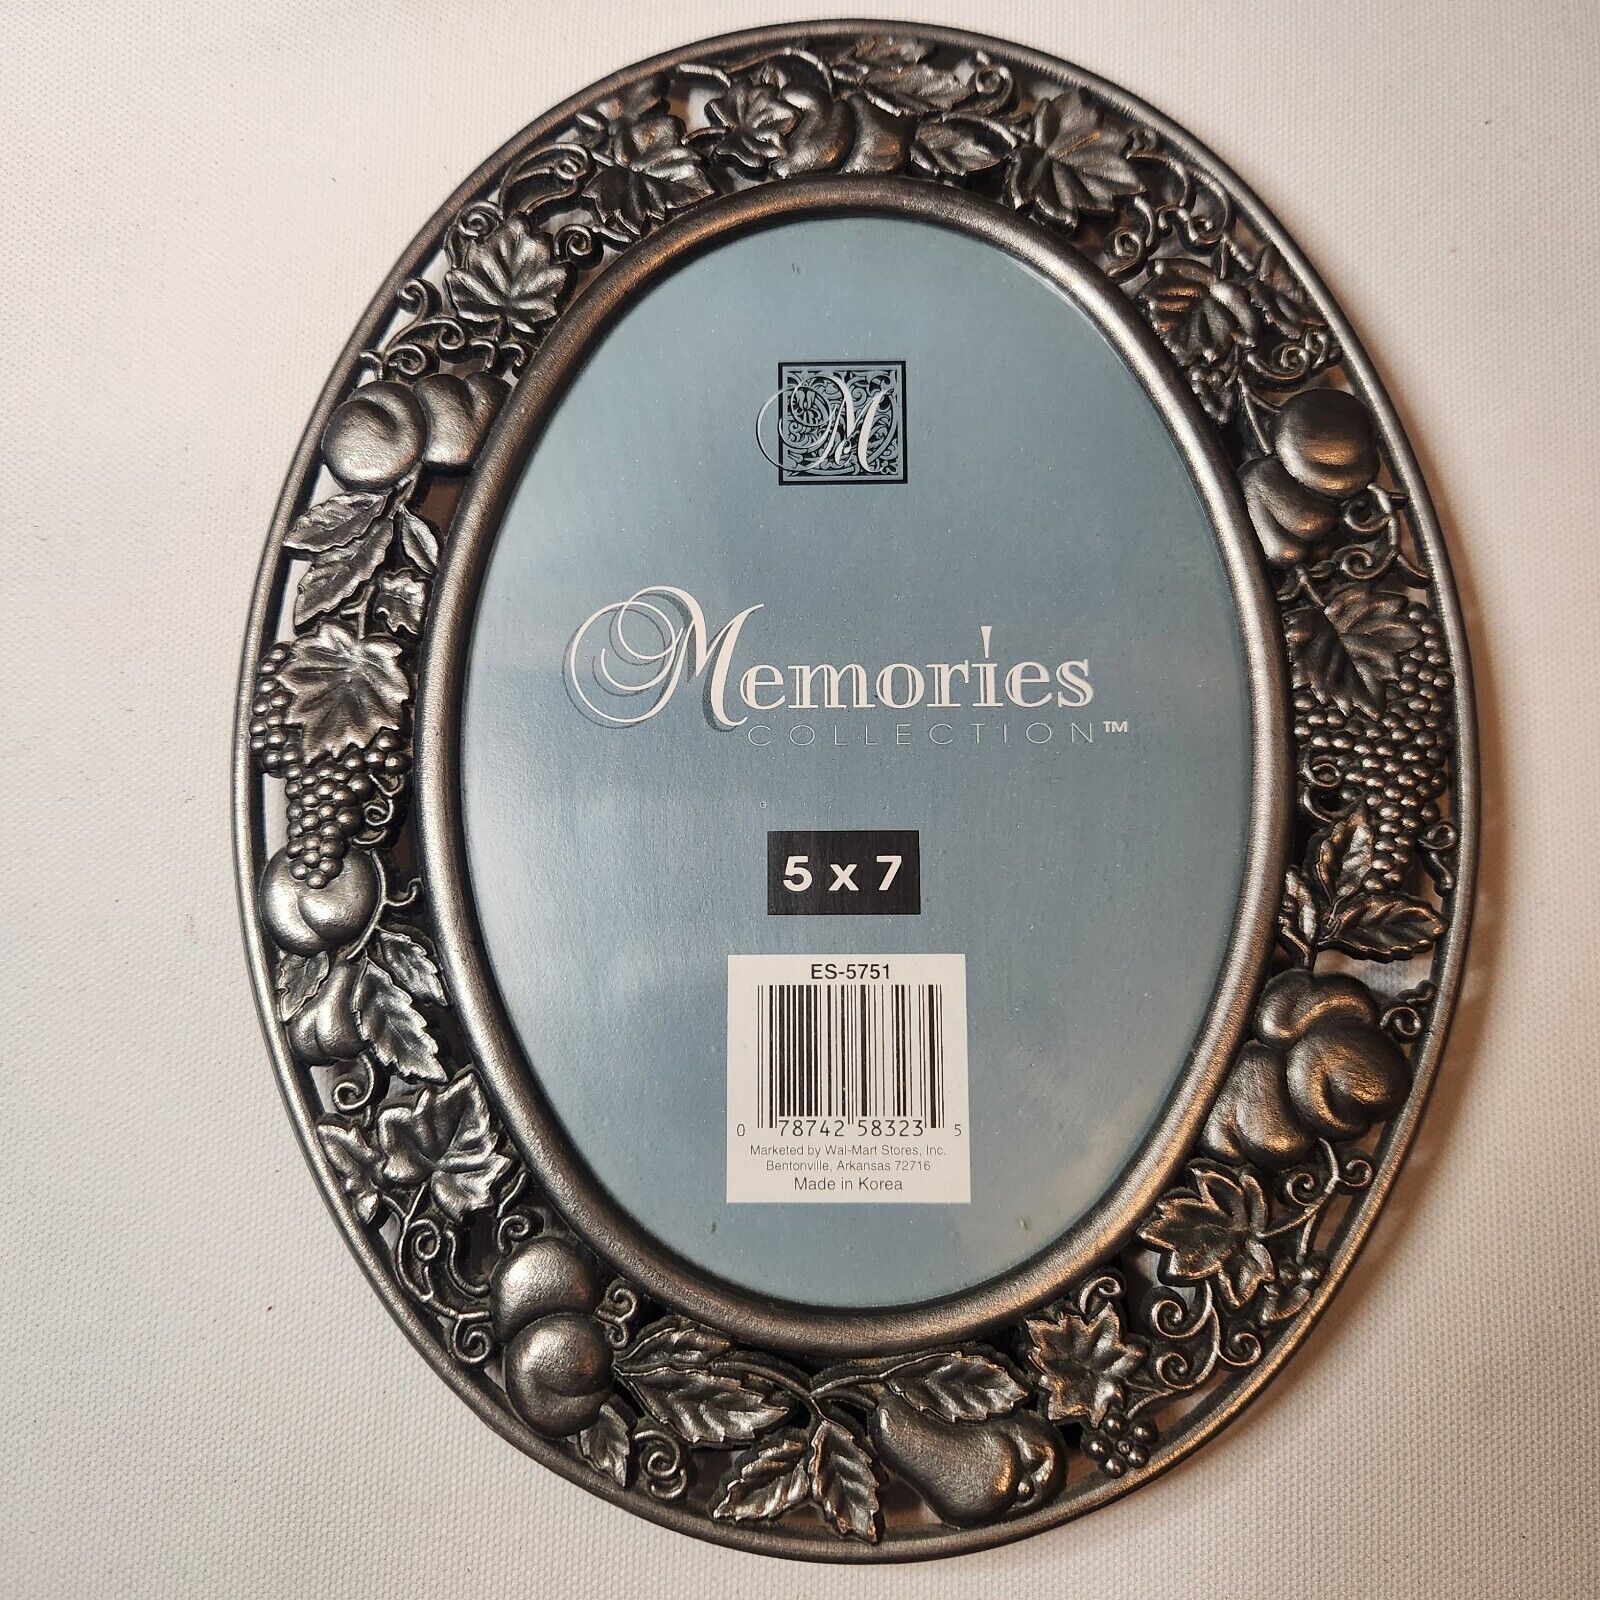 Vtg Oval Metal Picture Frame Grapes Pears Fruit & Leaves Vines Pewter 5x7 Easel